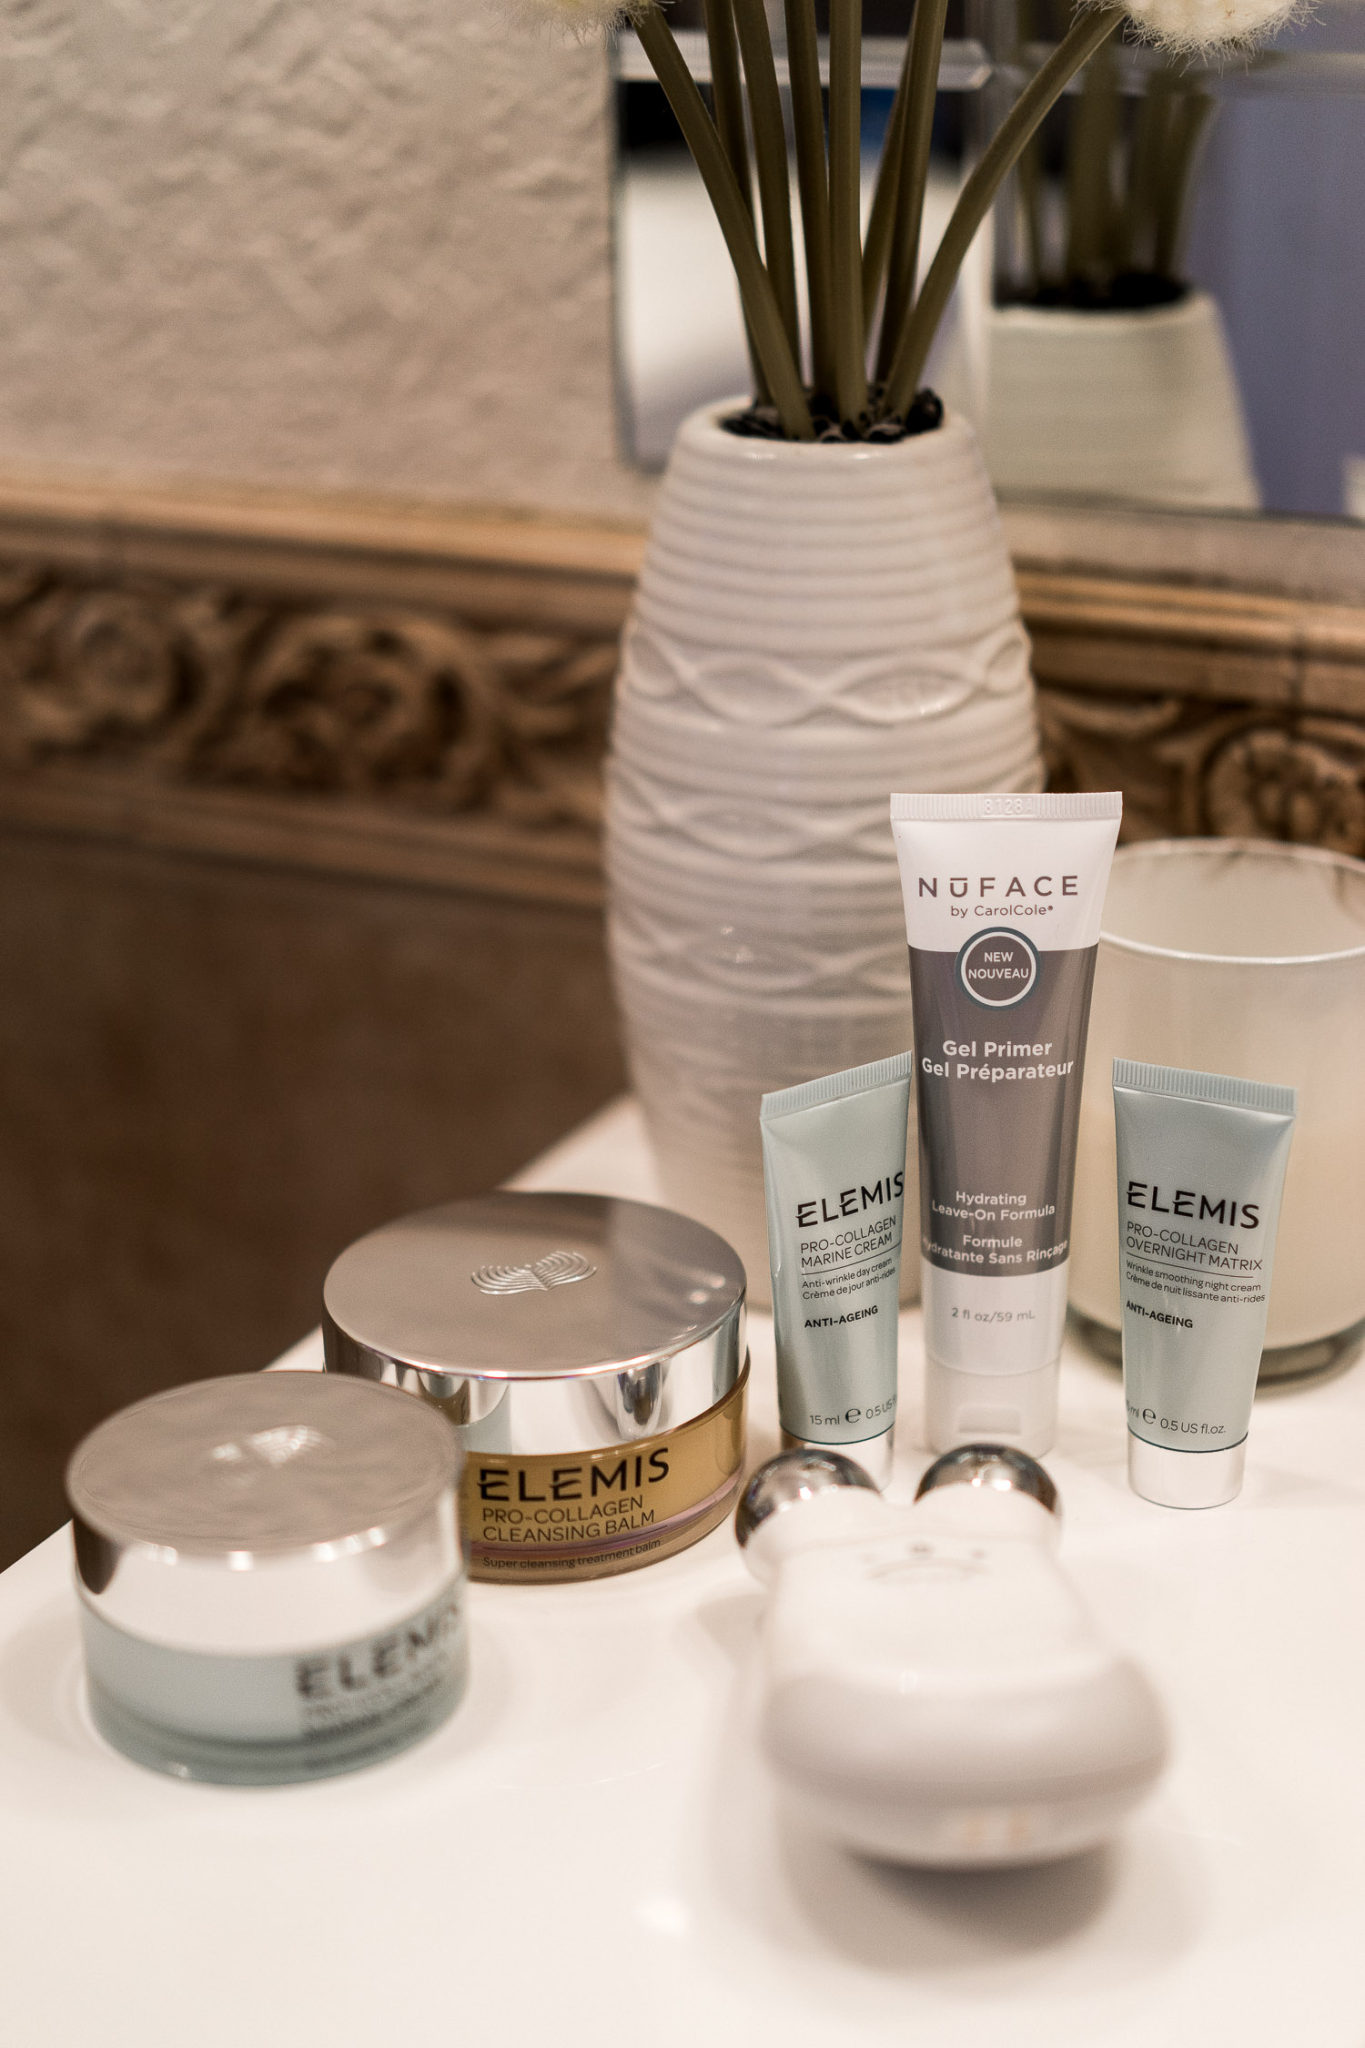 Night beauty regimen with Nuface Trinity facial toning device and a set of Elemis products from the Skinstore